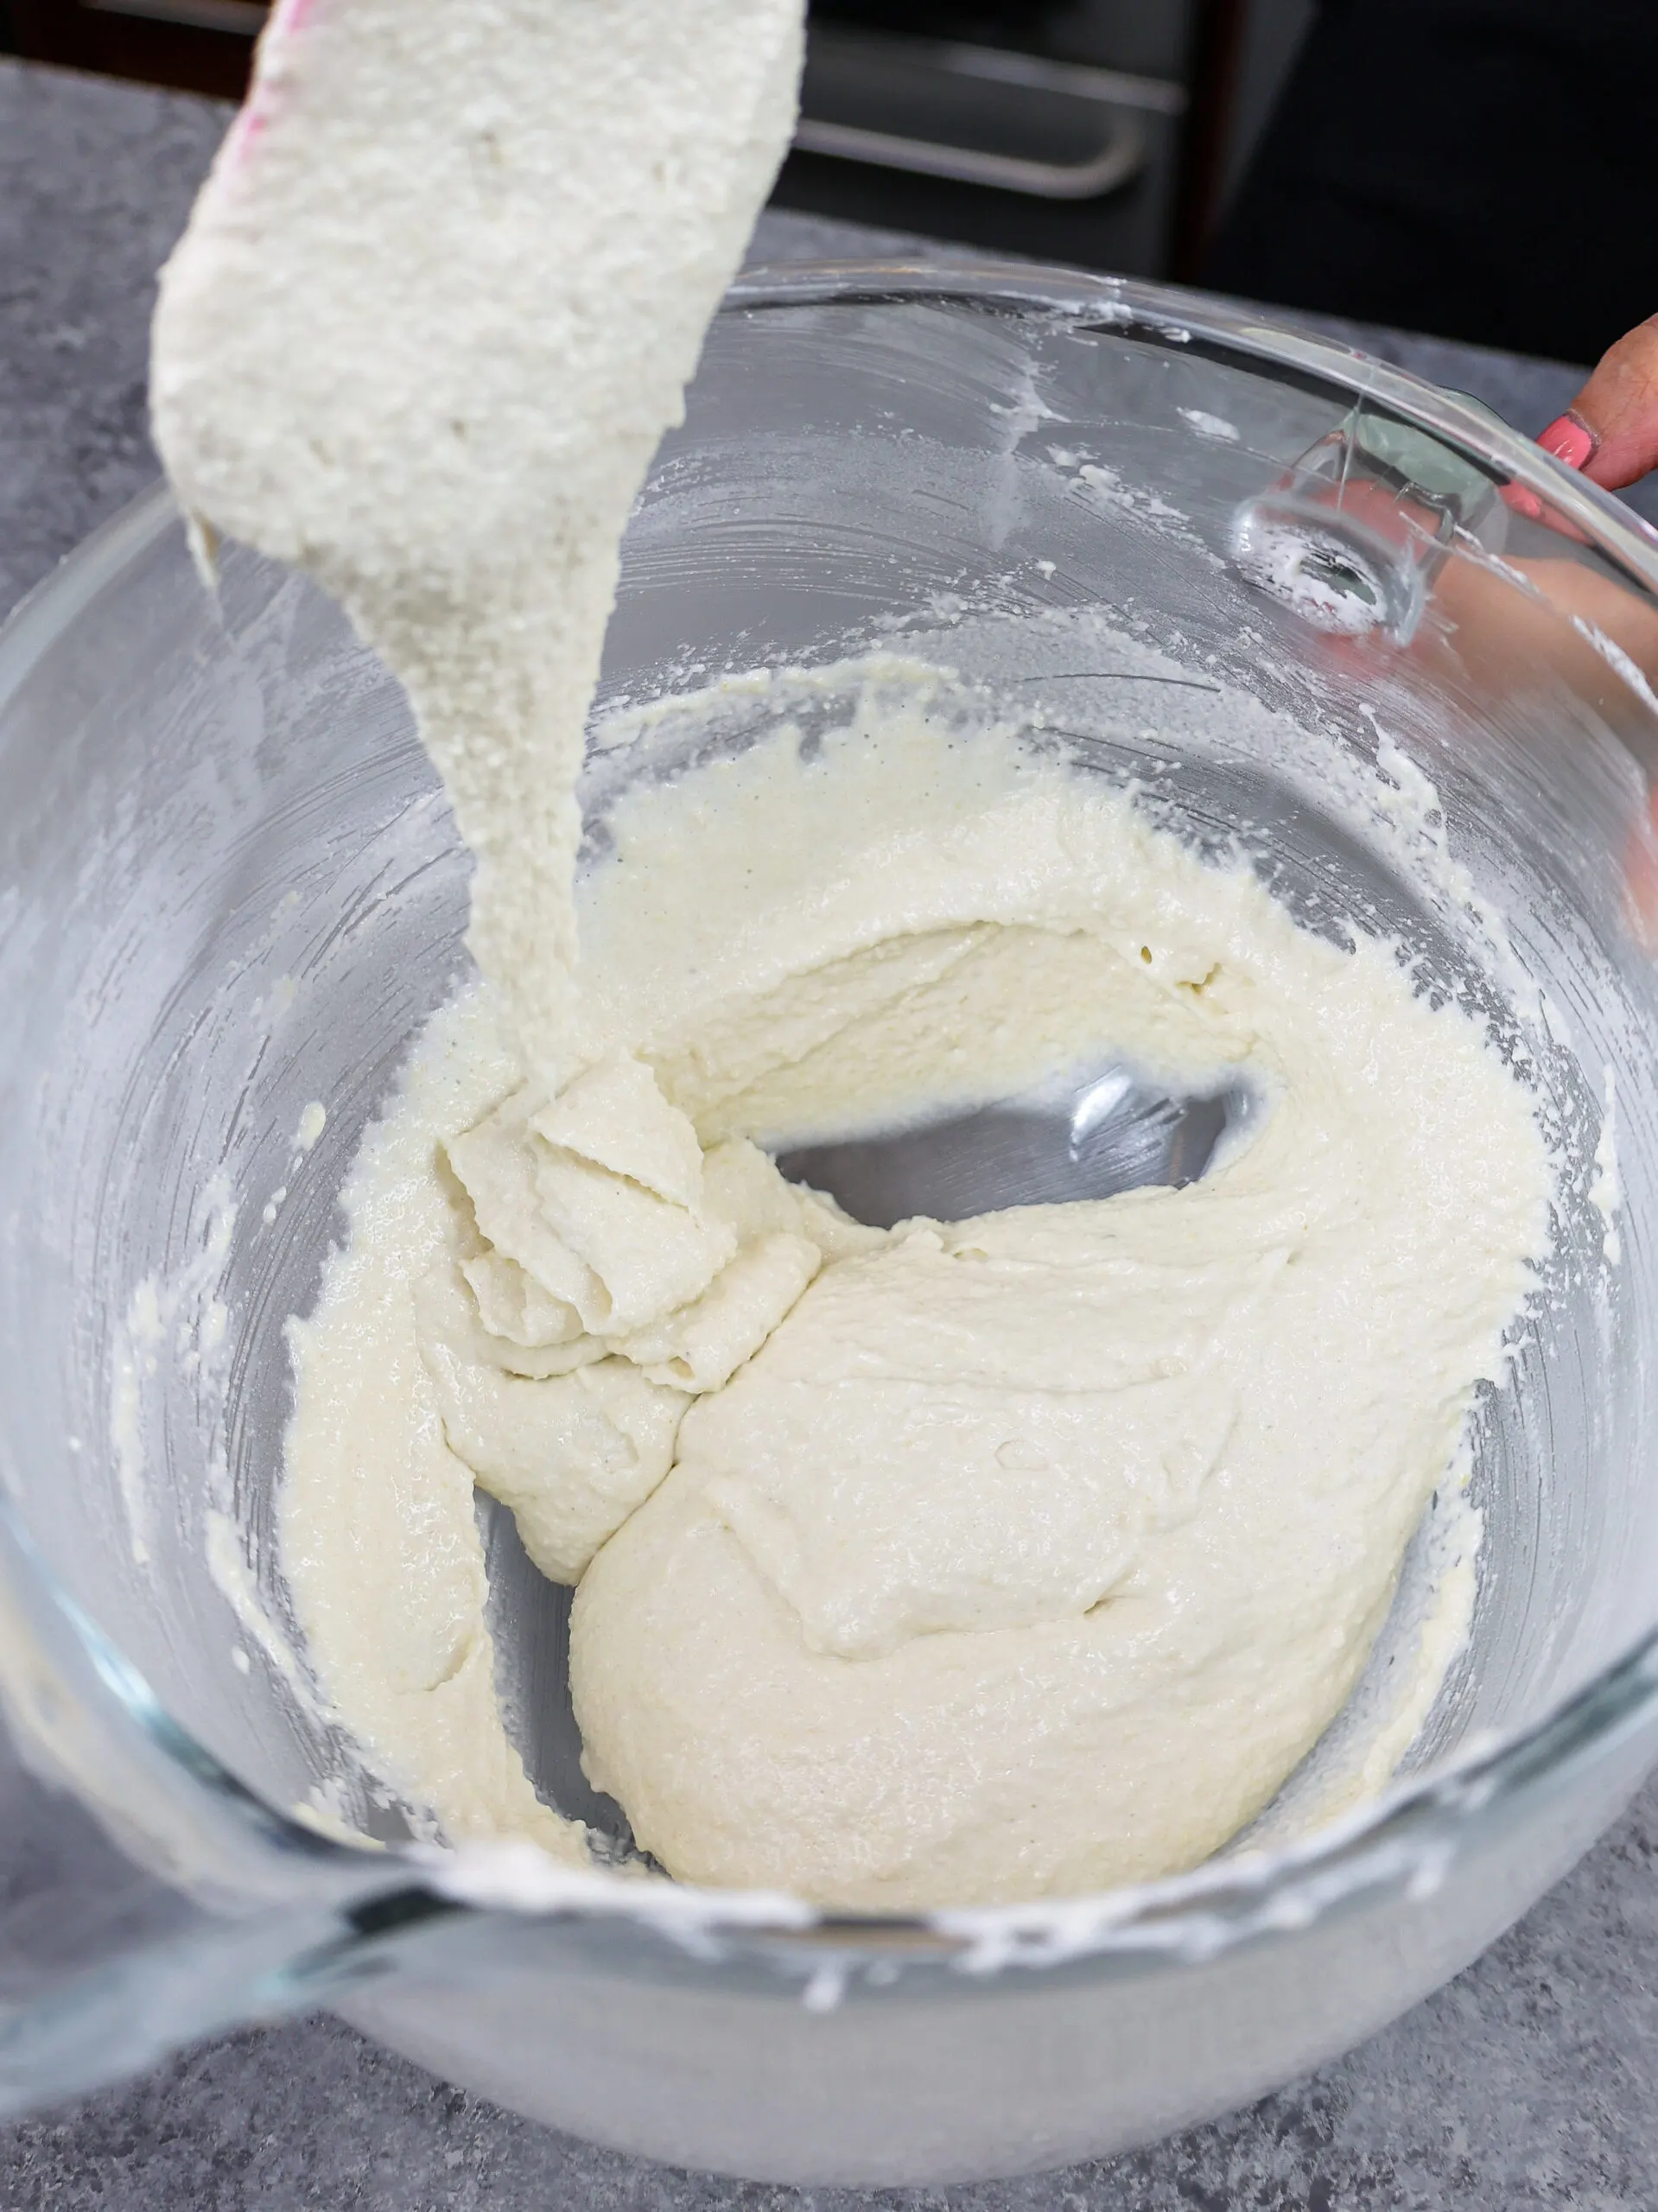 image of white vanilla macaron batter flowing off a rubber spatula in thick ribbons indicating it has been mixed perfectly and is ready to be piped